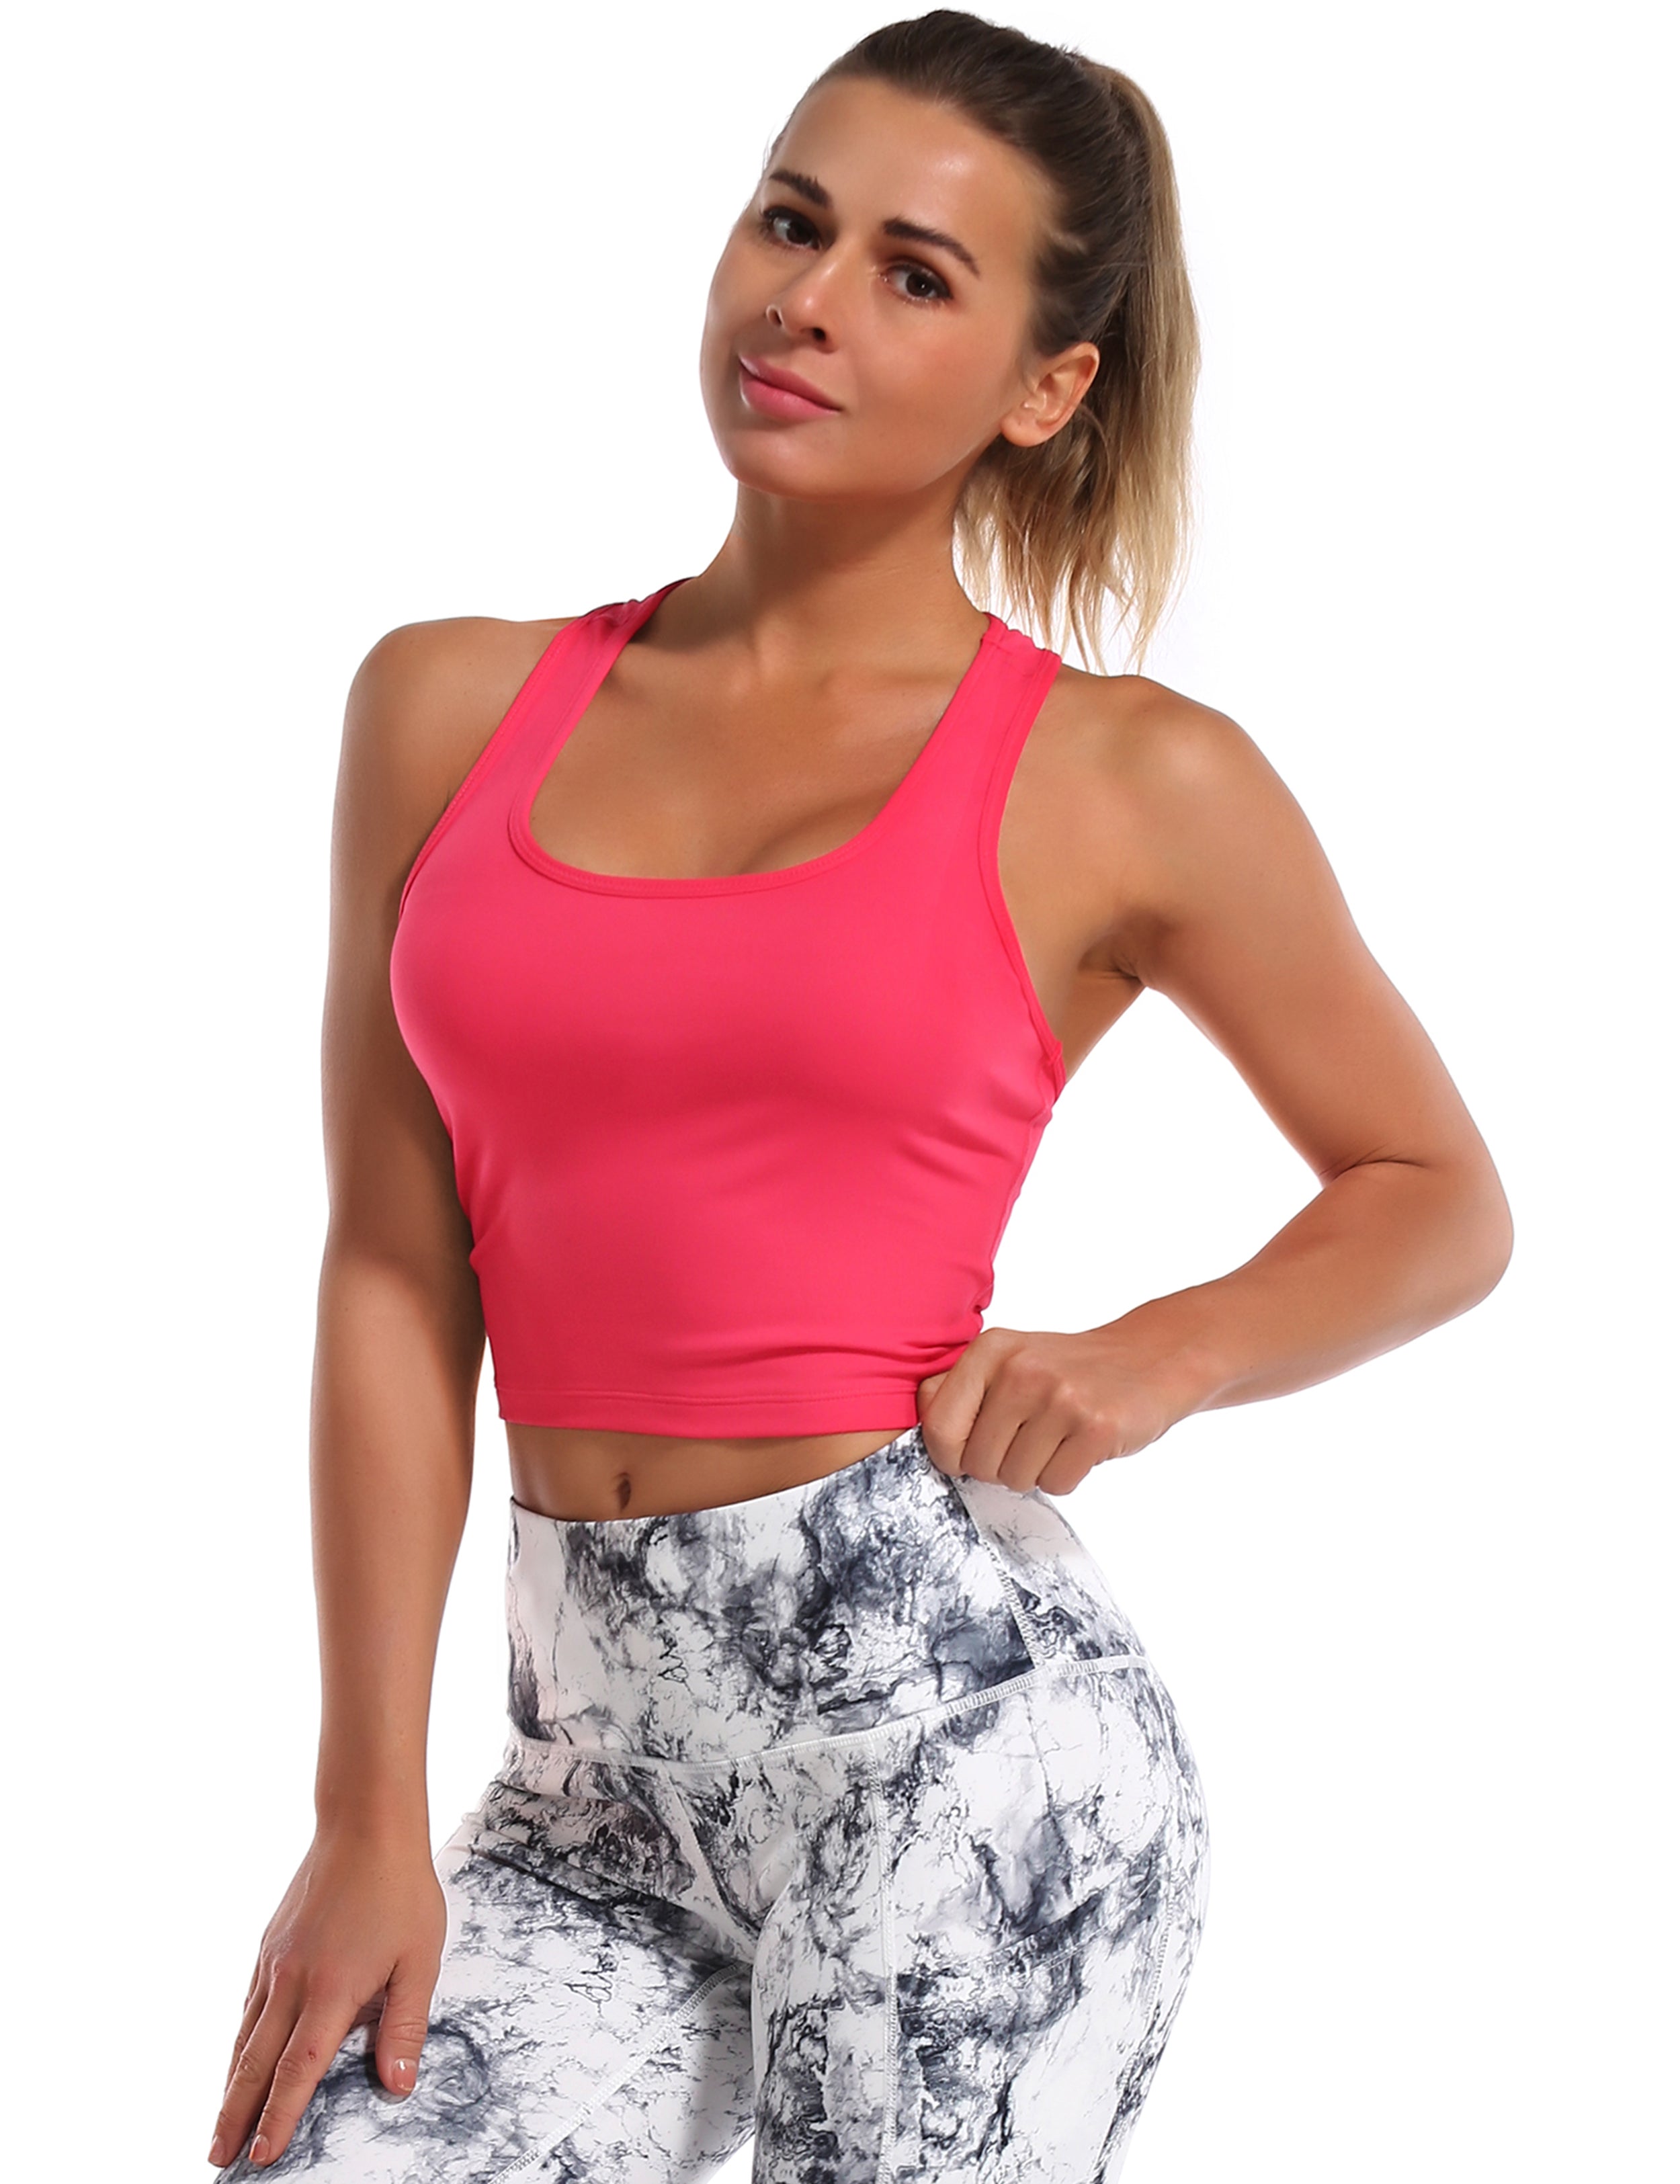 Racerback Athletic Crop Tank Tops red 92%Nylon/8%Spandex(Cotton Soft) Designed for Golf Tight Fit So buttery soft, it feels weightless Sweat-wicking Four-way stretch Breathable Contours your body Sits below the waistband for moderate, everyday coverage